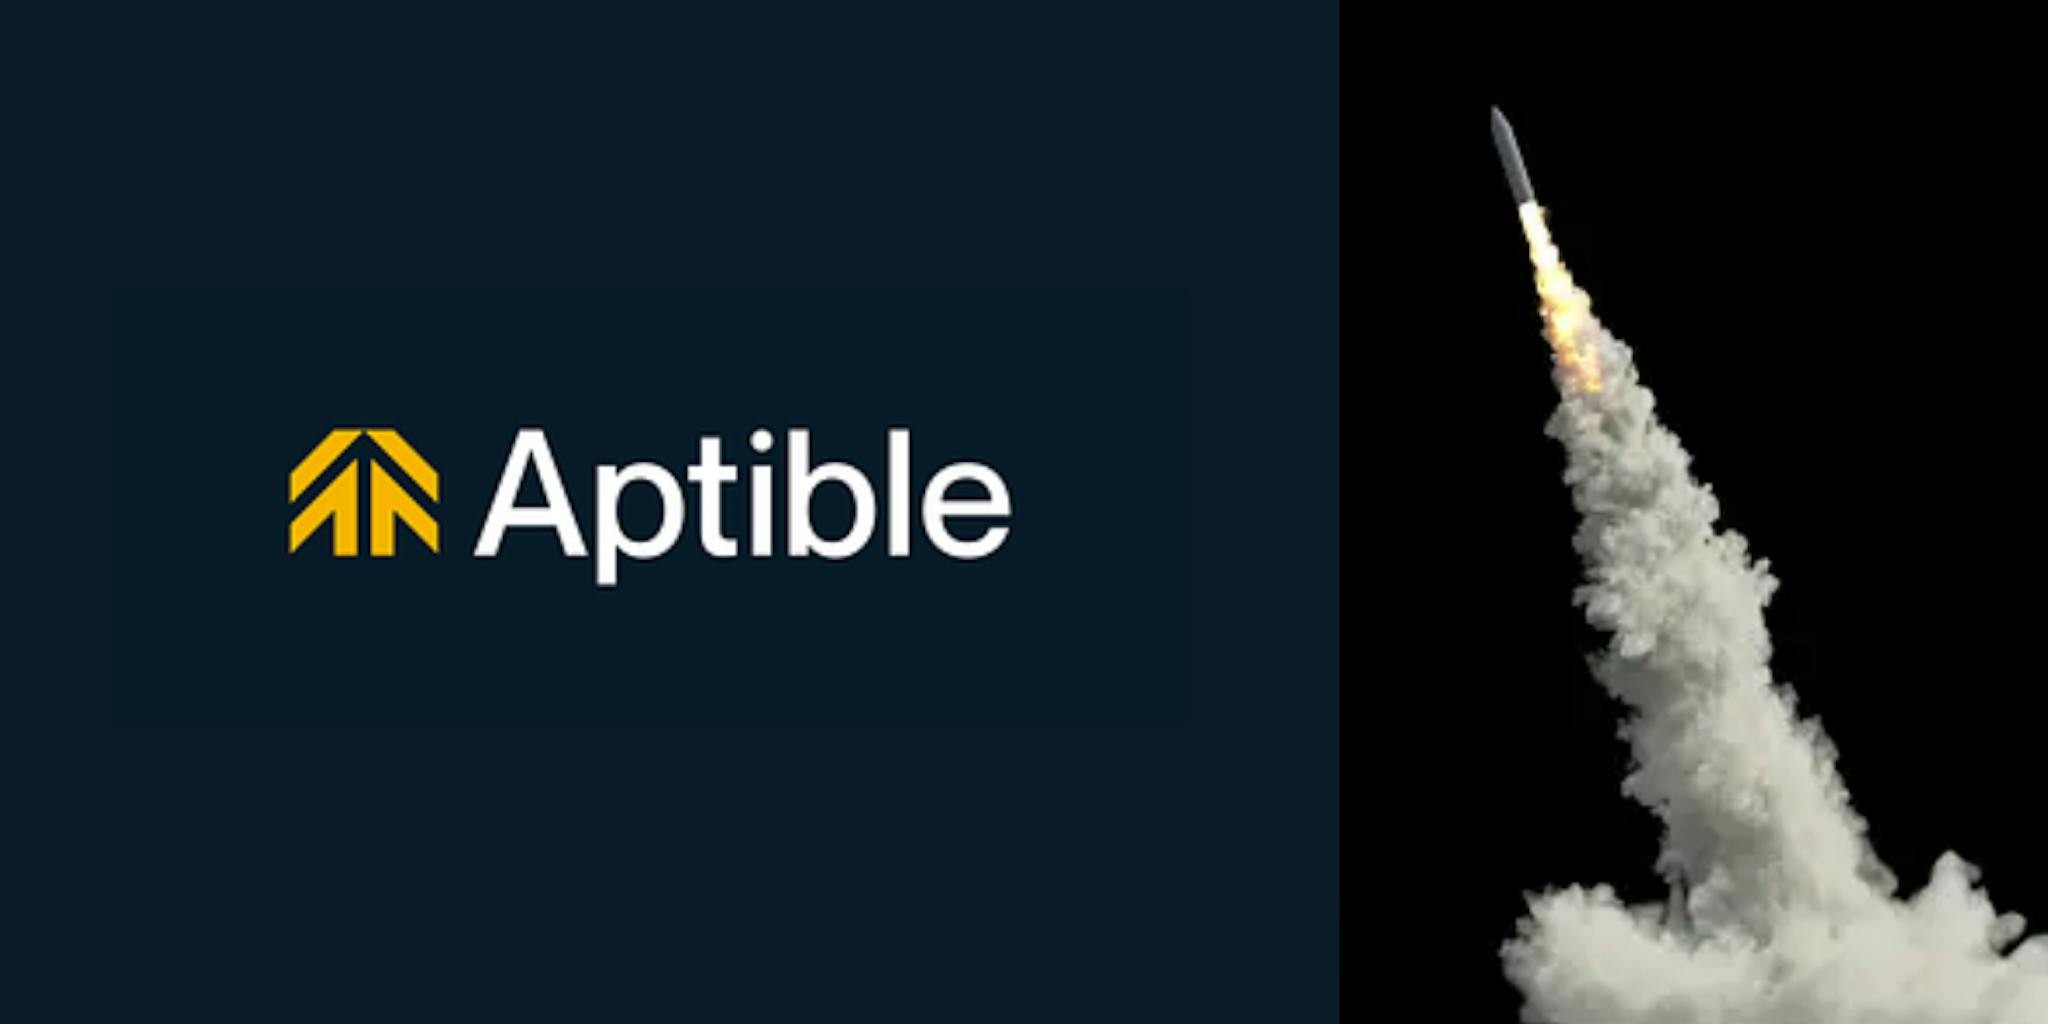 featured image - Beginner's Guide to Docker Image Deployment With Aptible (and Get a Free Shirt!)